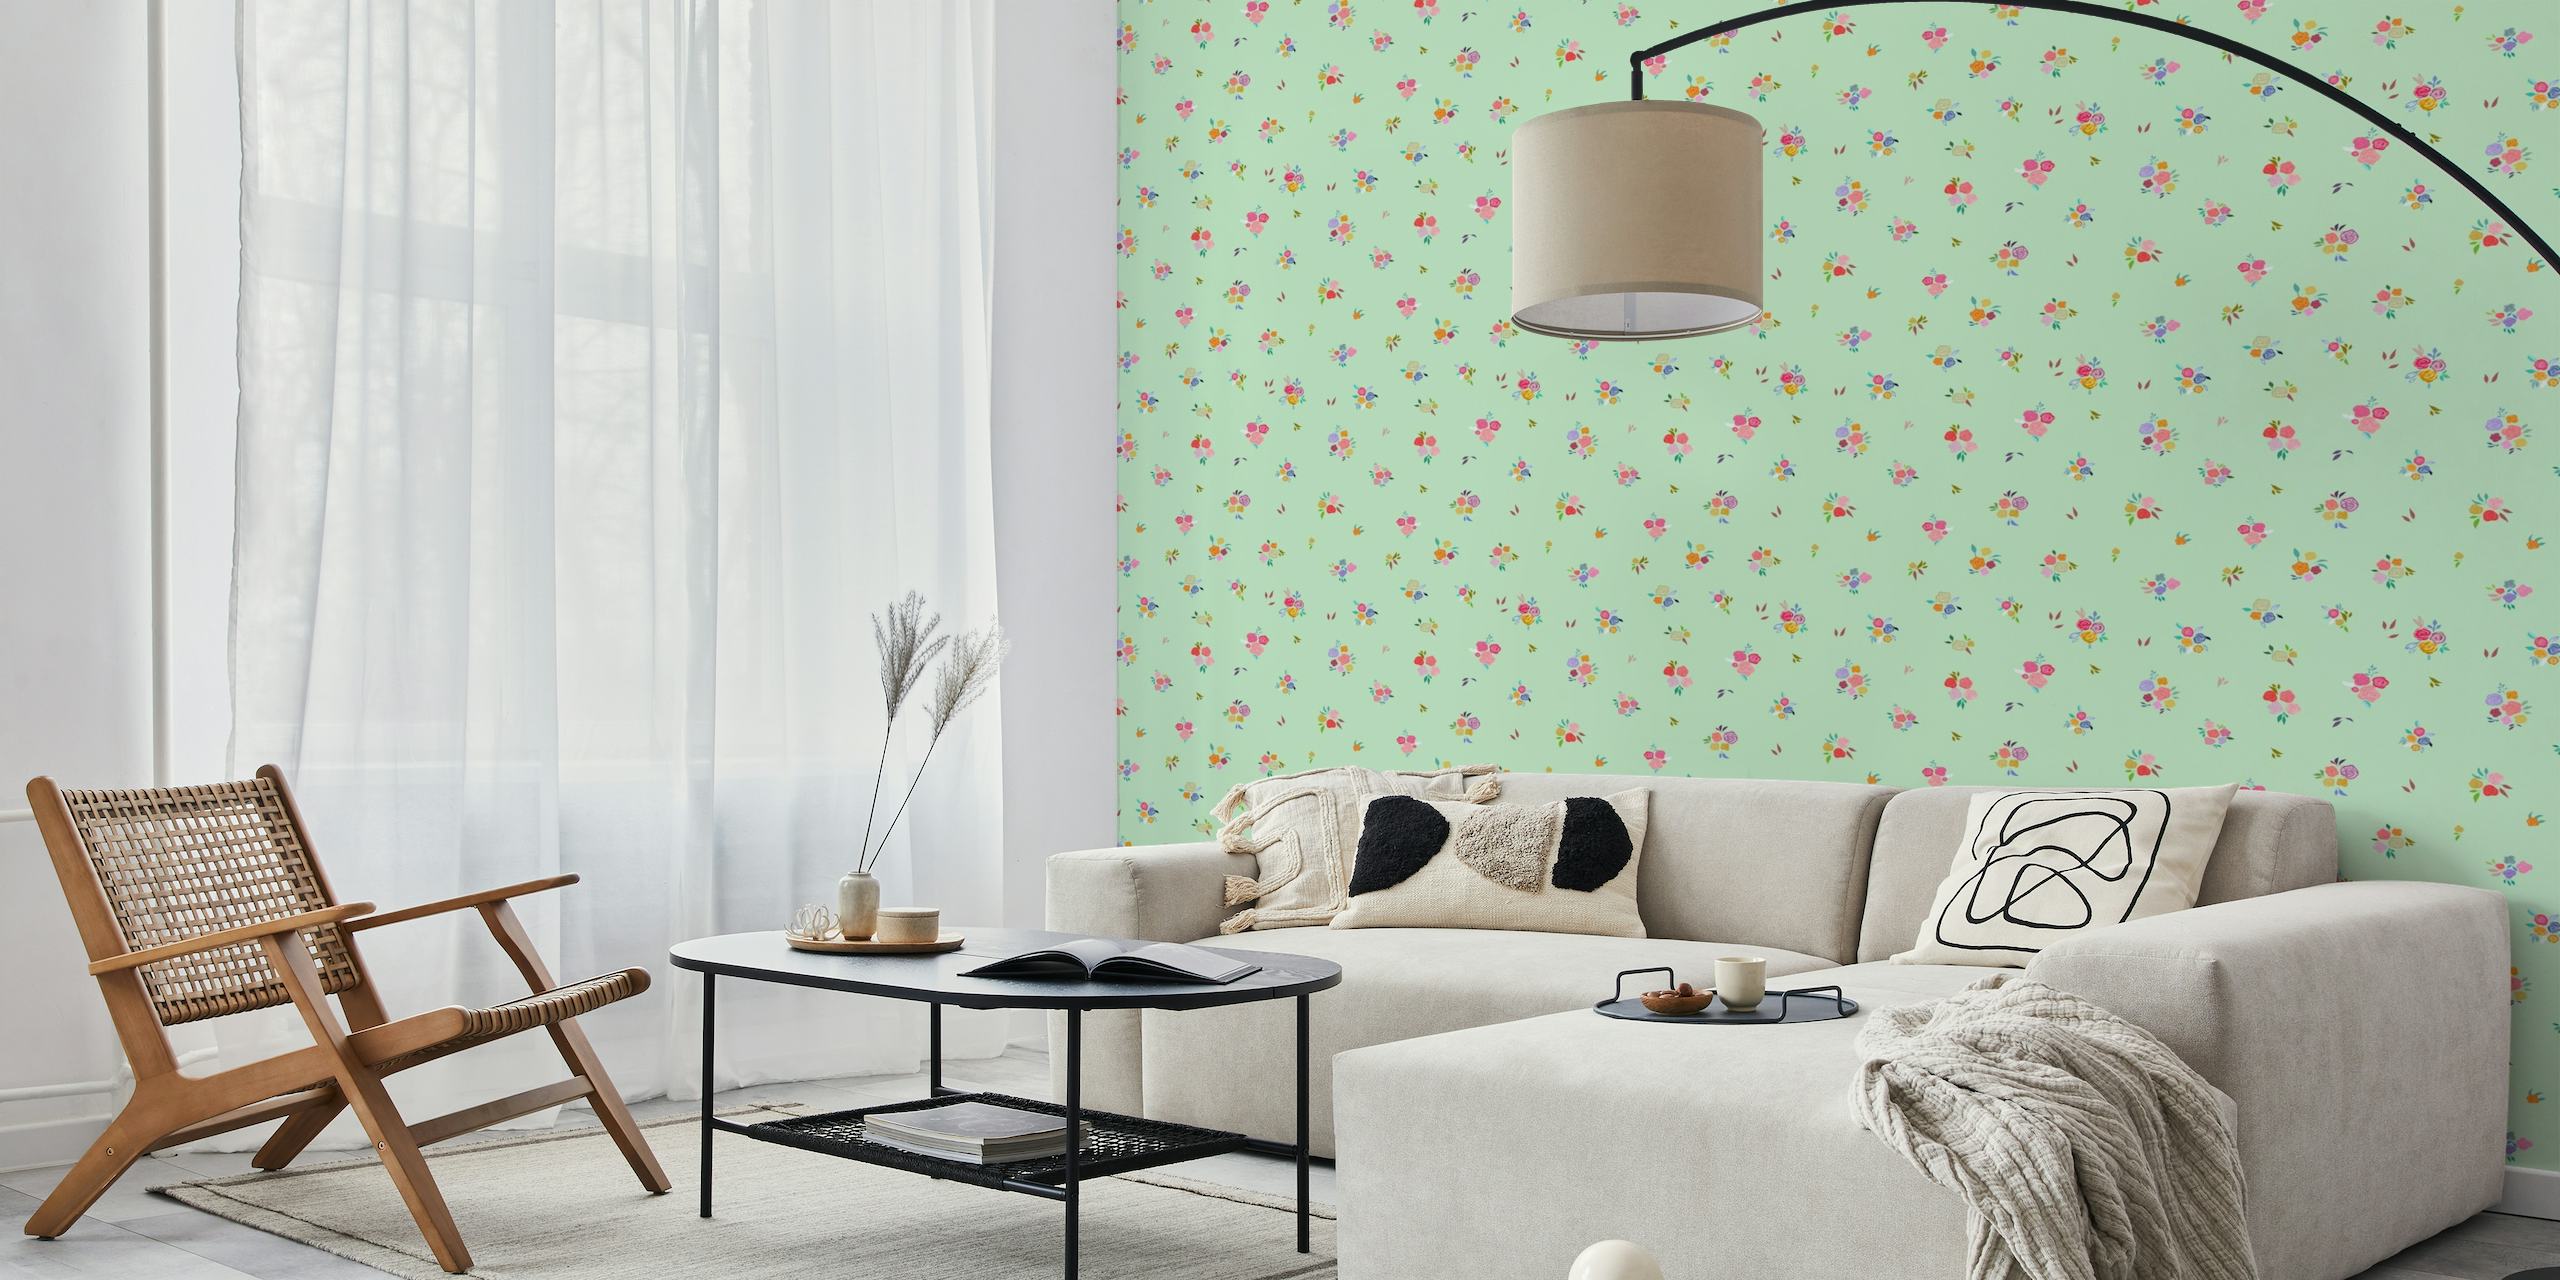 Pretty florals trend ditsy flowers green background papel pintado